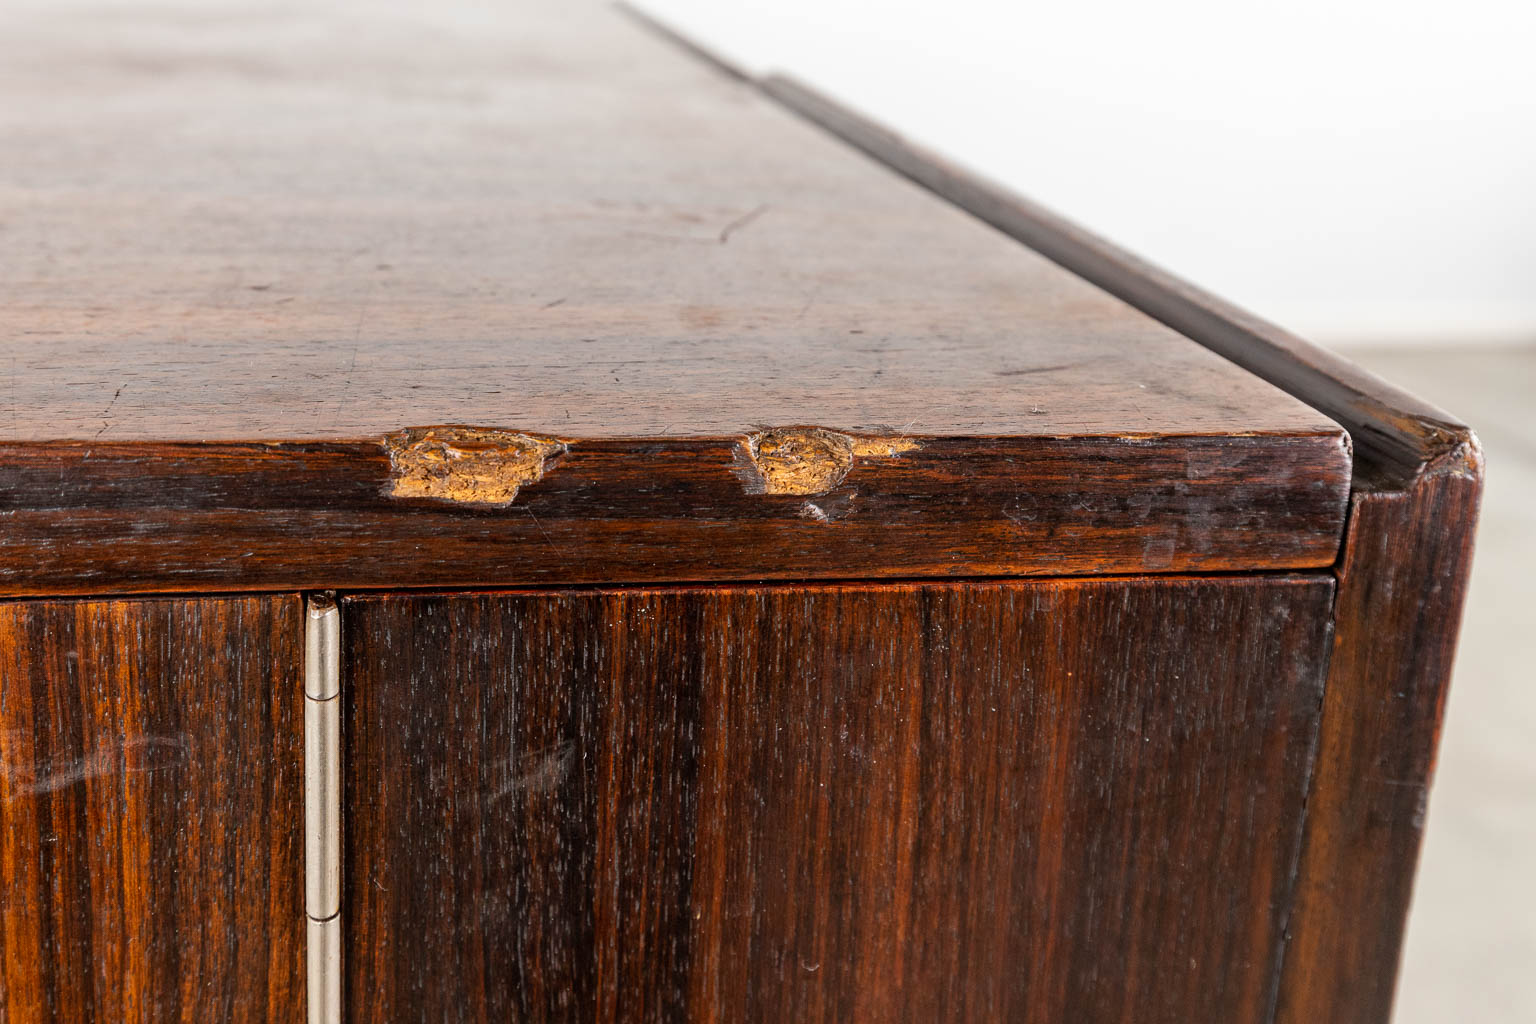 A mid-century sideboard with rosewood veneer, probably made by Decoene. (D:56 x W:225 x H:78 cm)